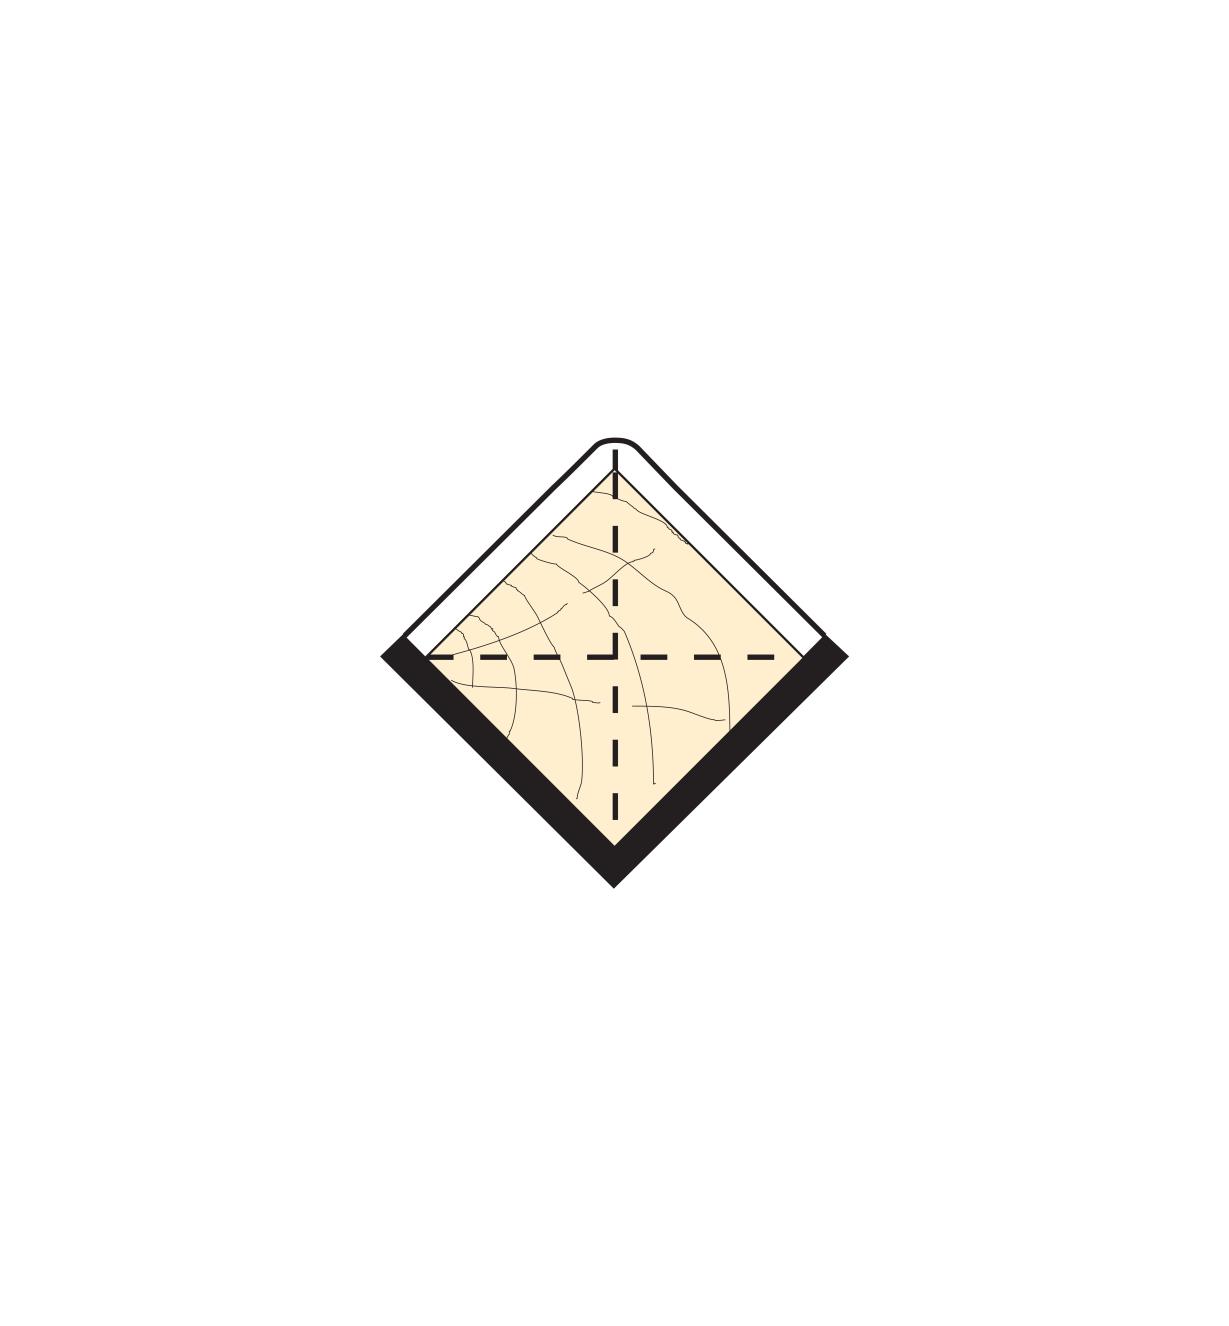 Illustration showing how a square item sits in the center marker